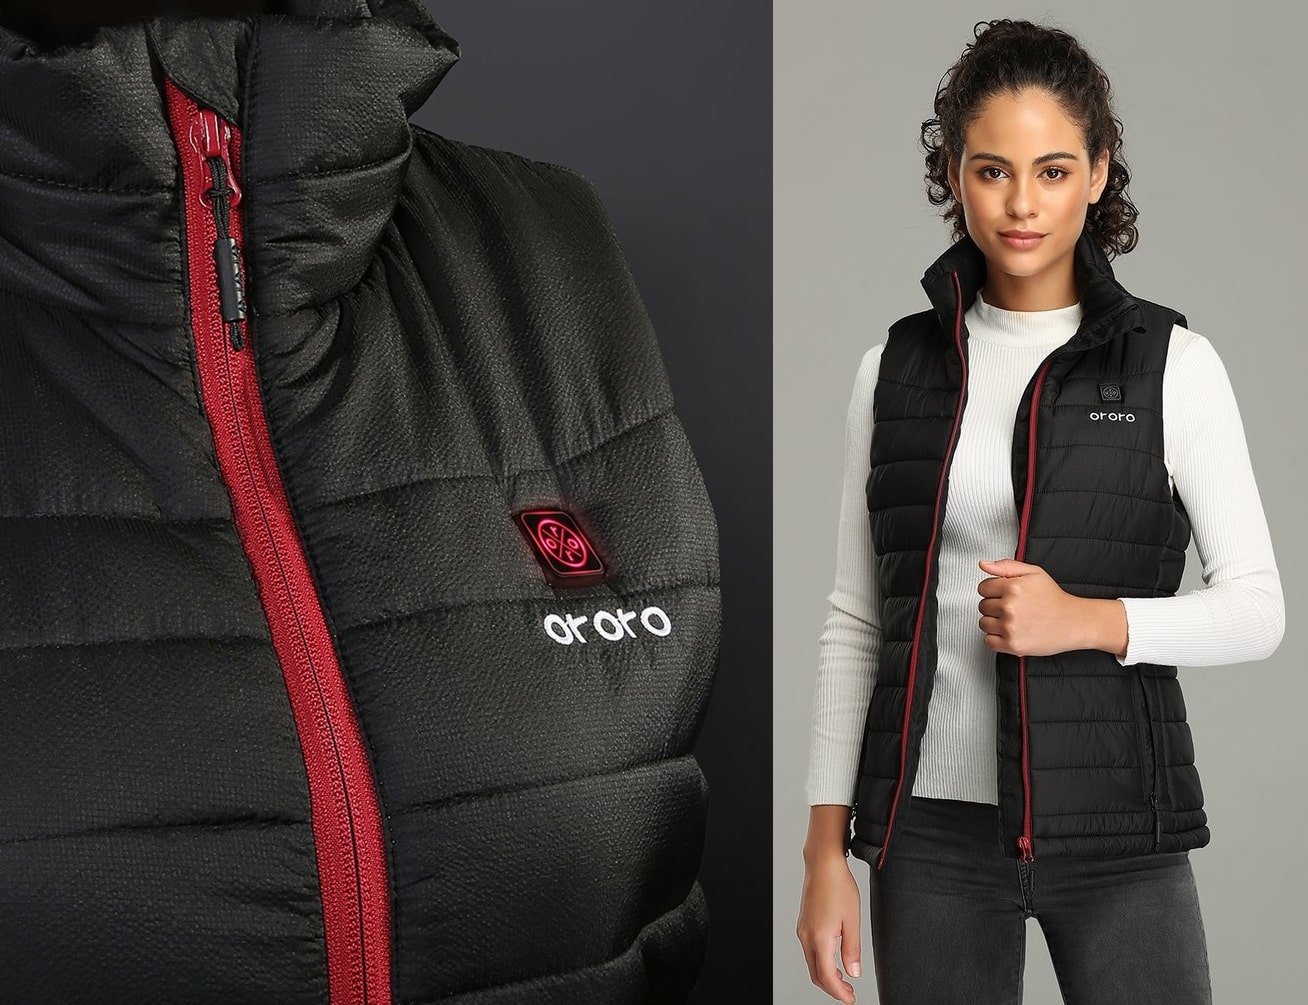 Enjoy up to 10 hours of long-lasting warmth with this lightweight heated vest featuring both a heated collar and upper body warmth